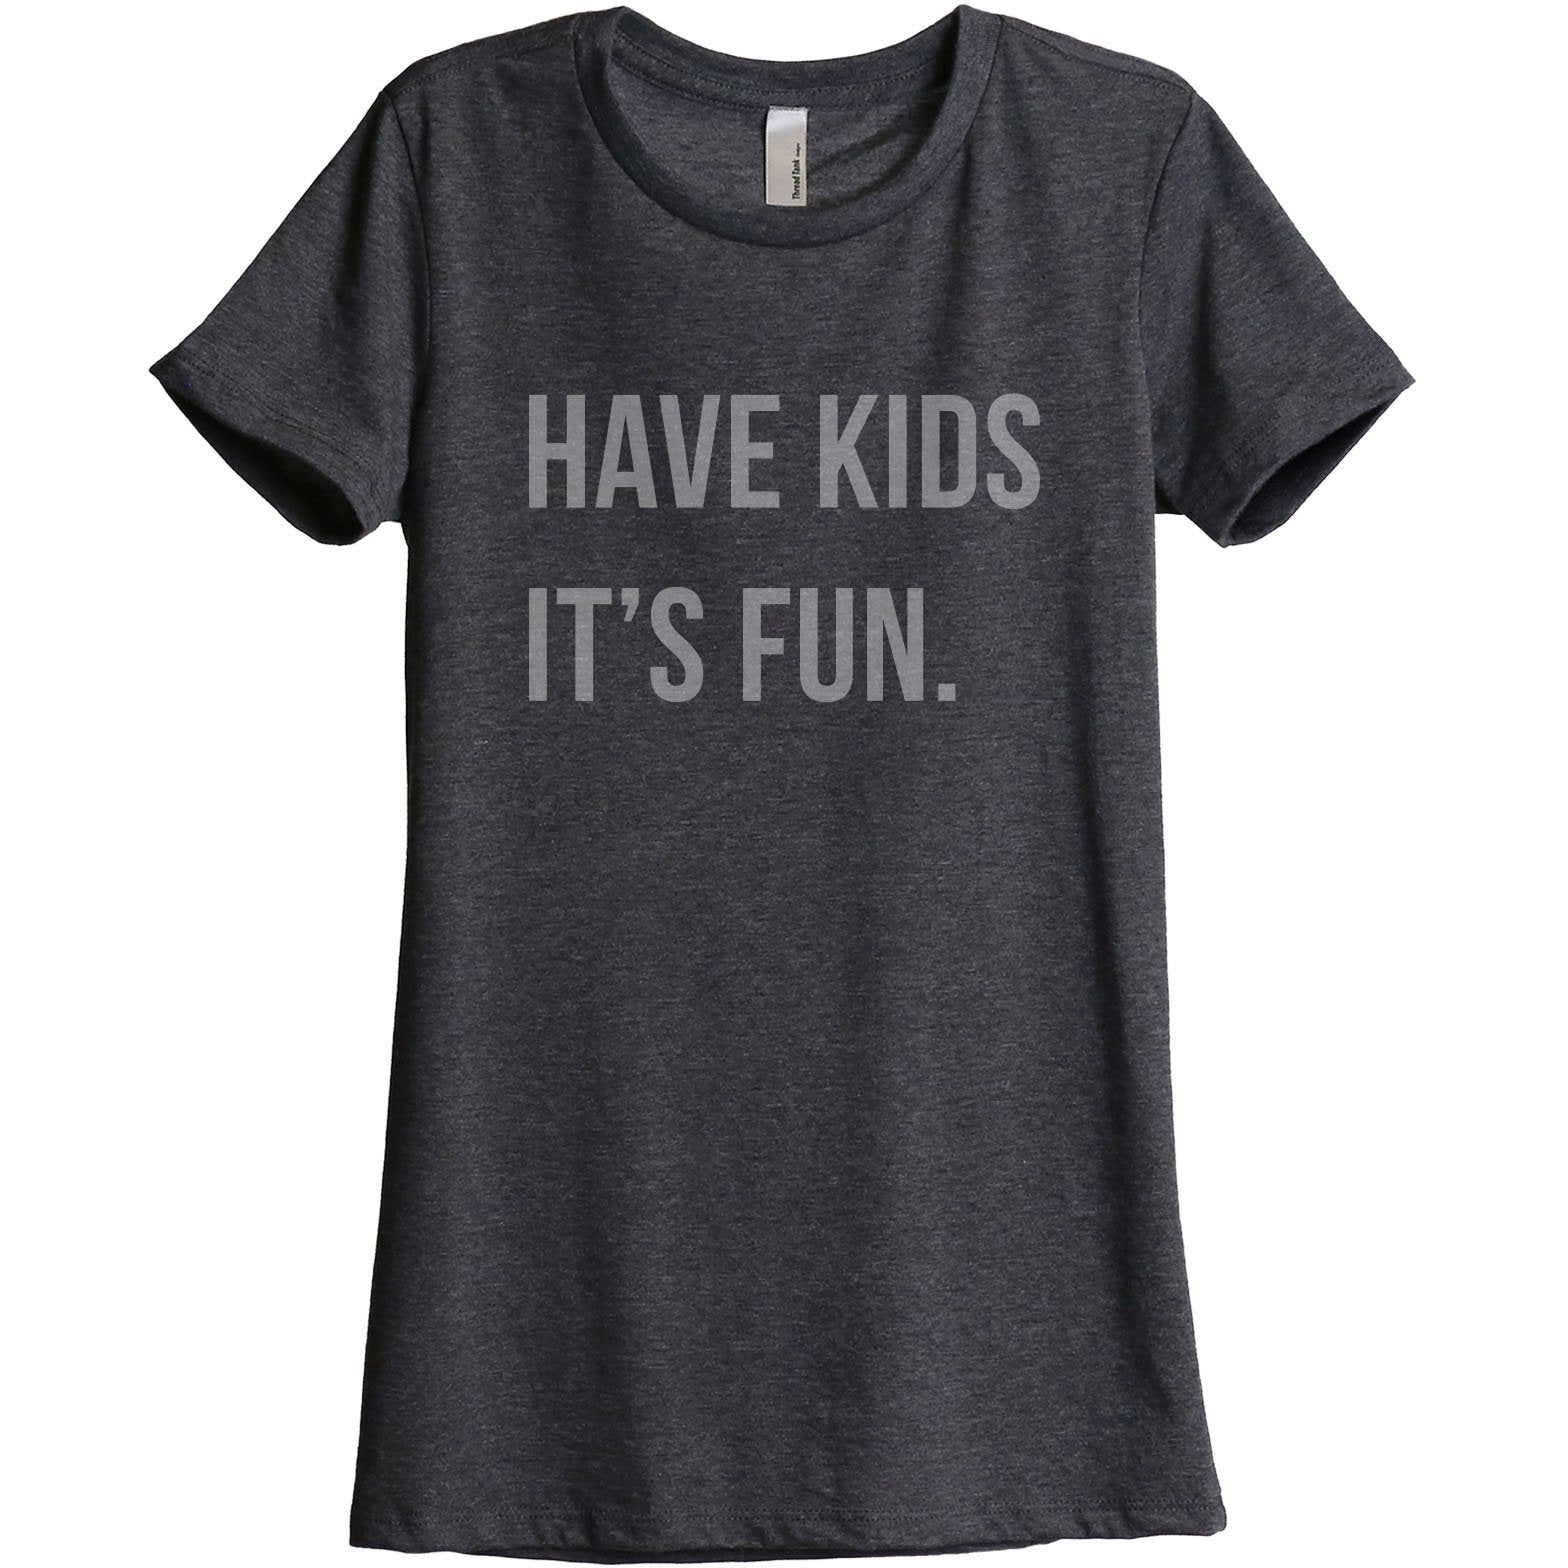 Have Kids It's Fun Women's Relaxed Crewneck T-Shirt Top Tee Charcoal Grey
